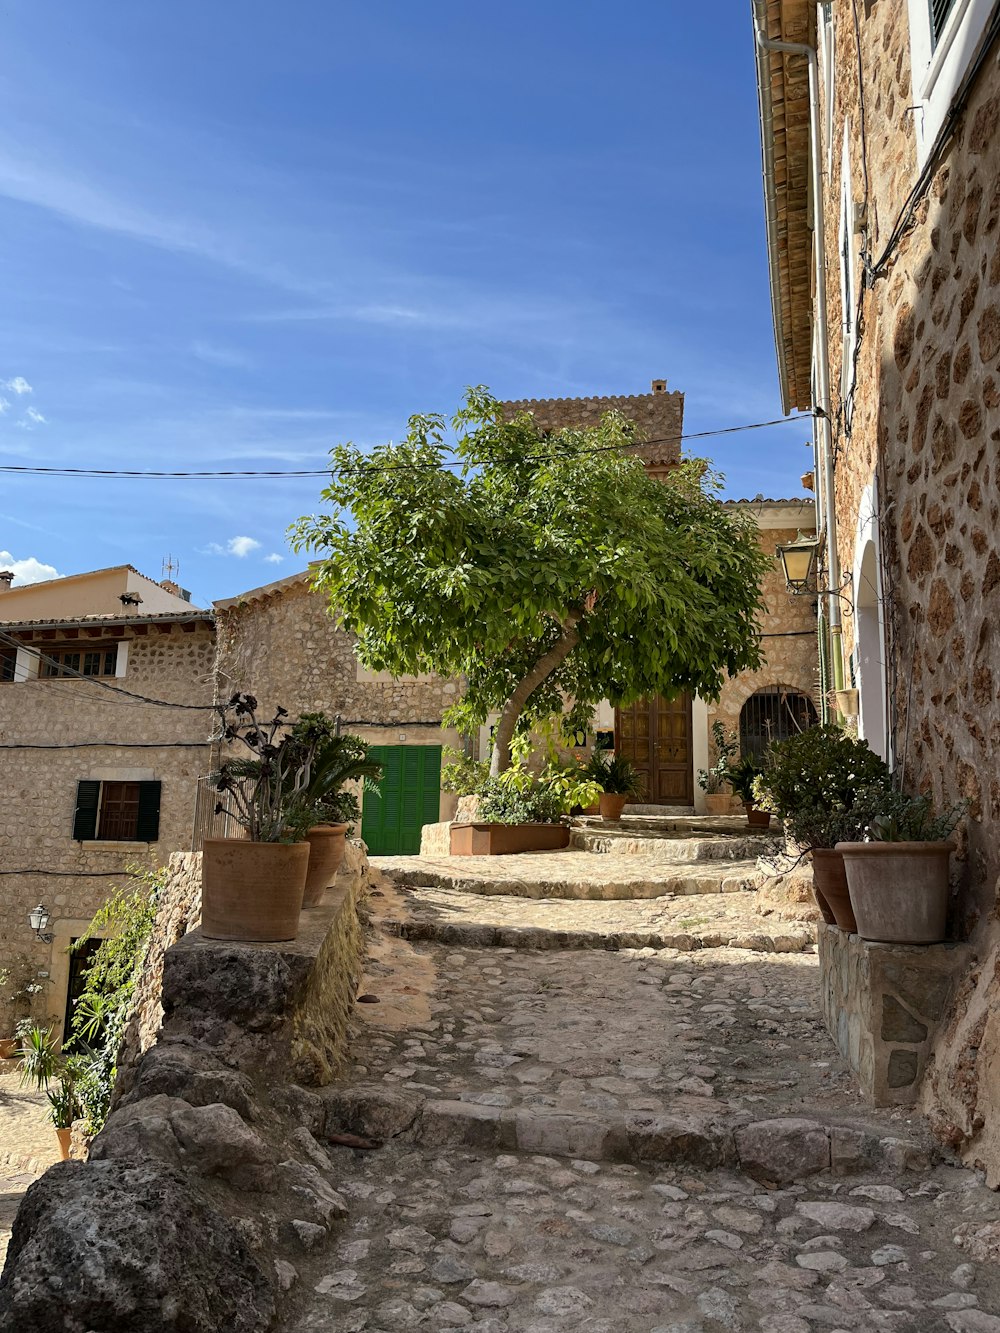 a stone courtyard with a tree and buildings